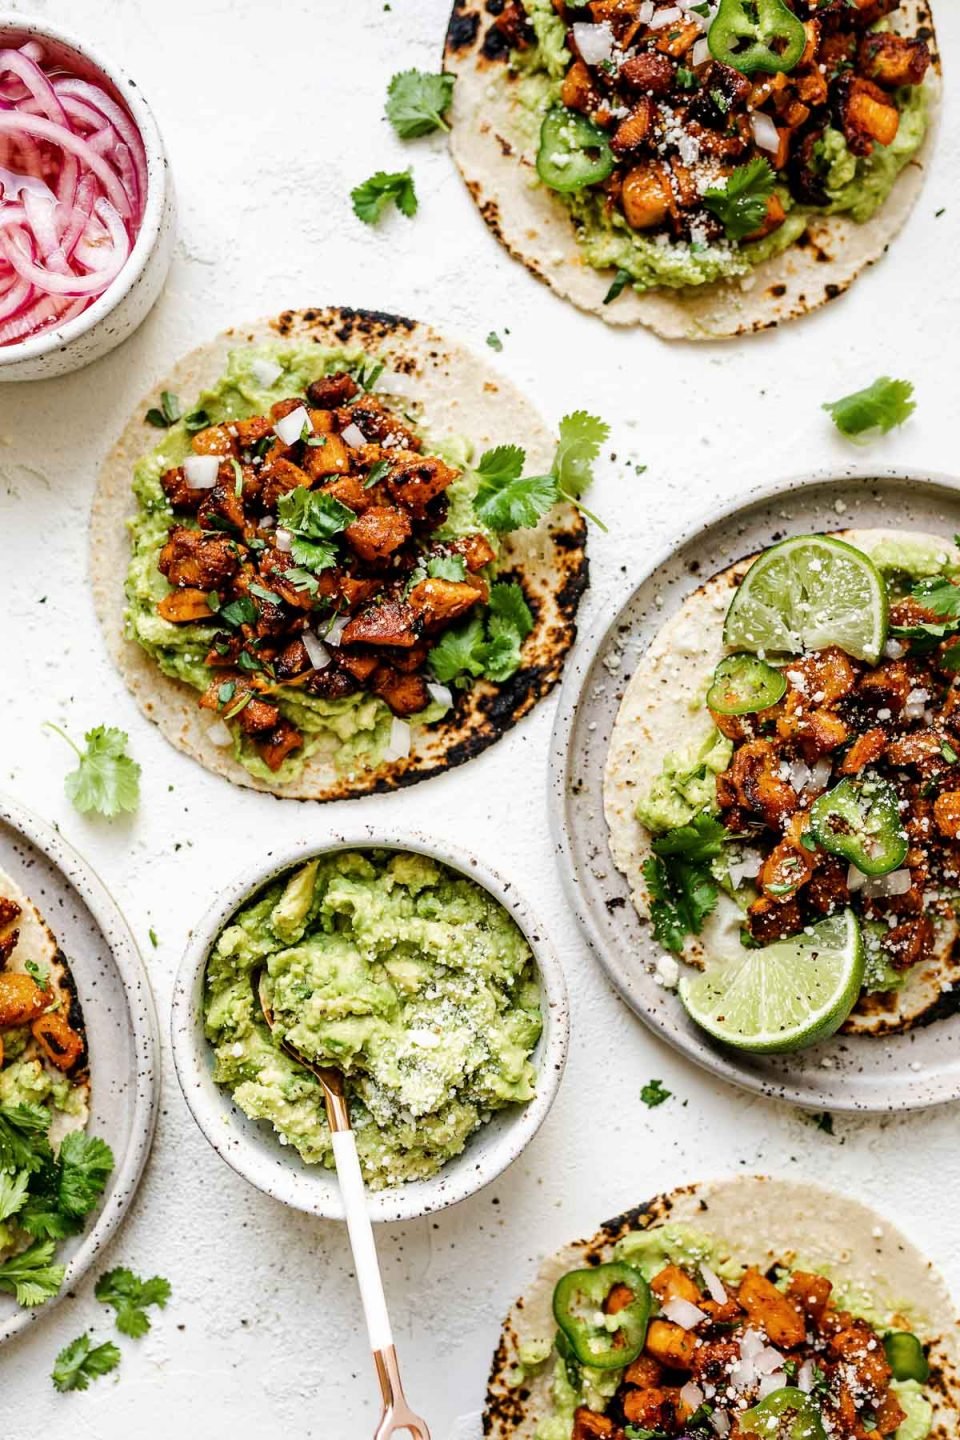 Five chicken al pastor tacos on a white plaster surface. Two of the tacos are placed on small speckled ceramic plates. Surrounding the tacos are pickled red onions, mashed avocado, and fresh cilantro leaves.